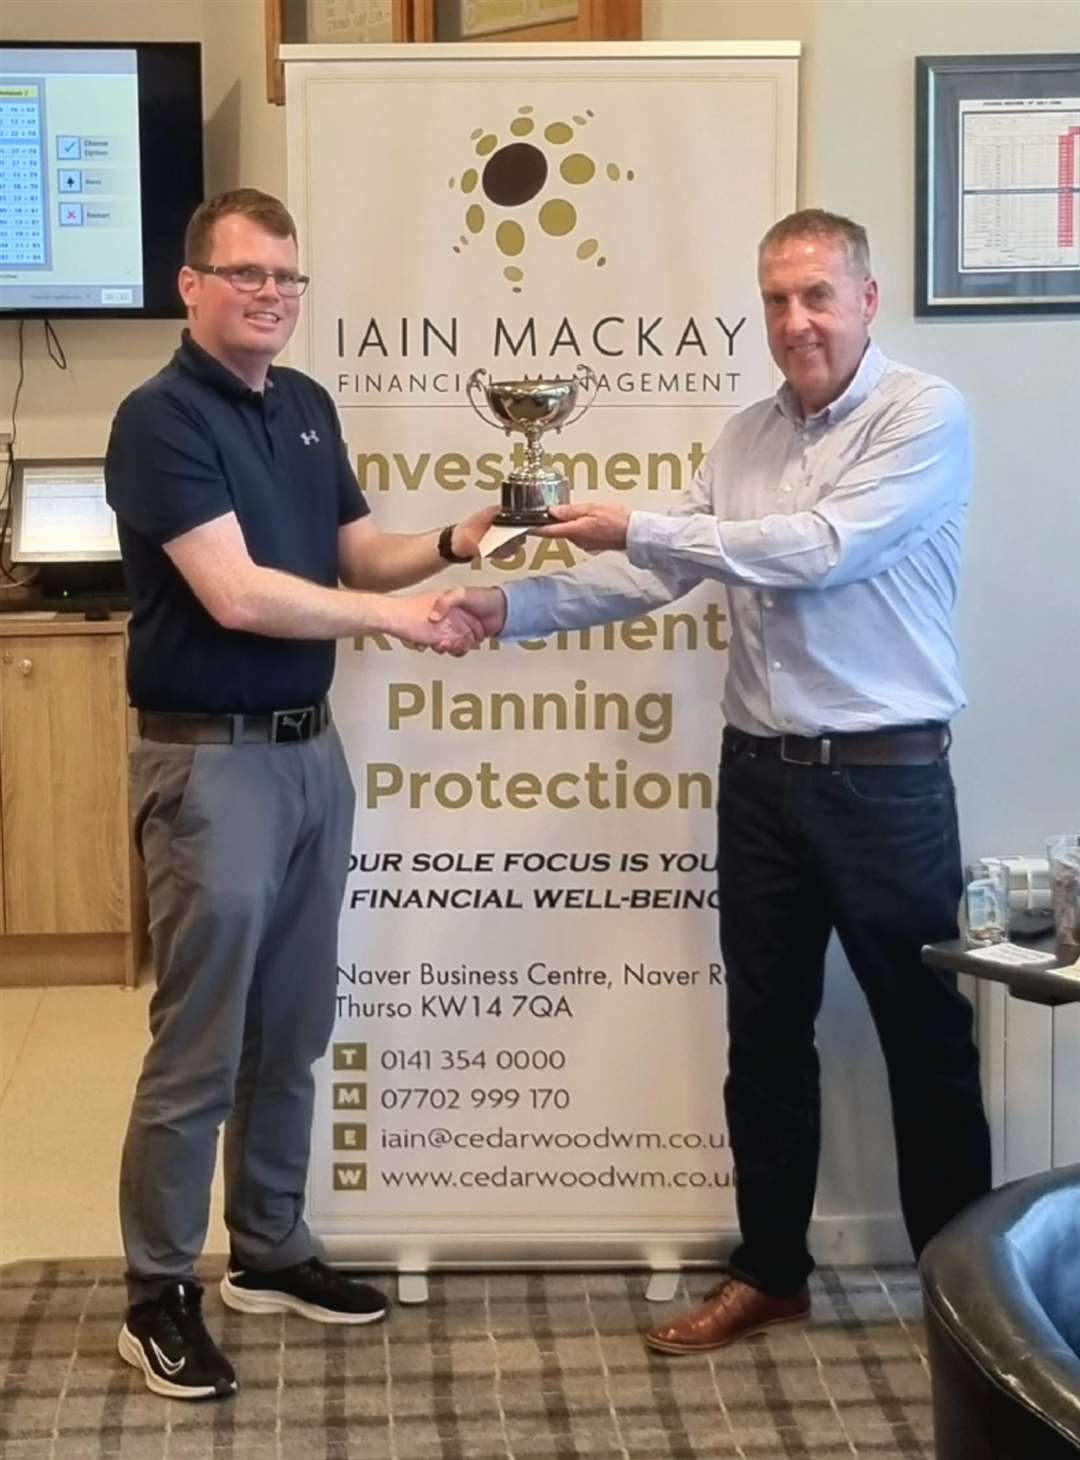 Scratch winner Brent Munro receiving his trophy from Iain Mackay (Iain Mackay Financial Management).